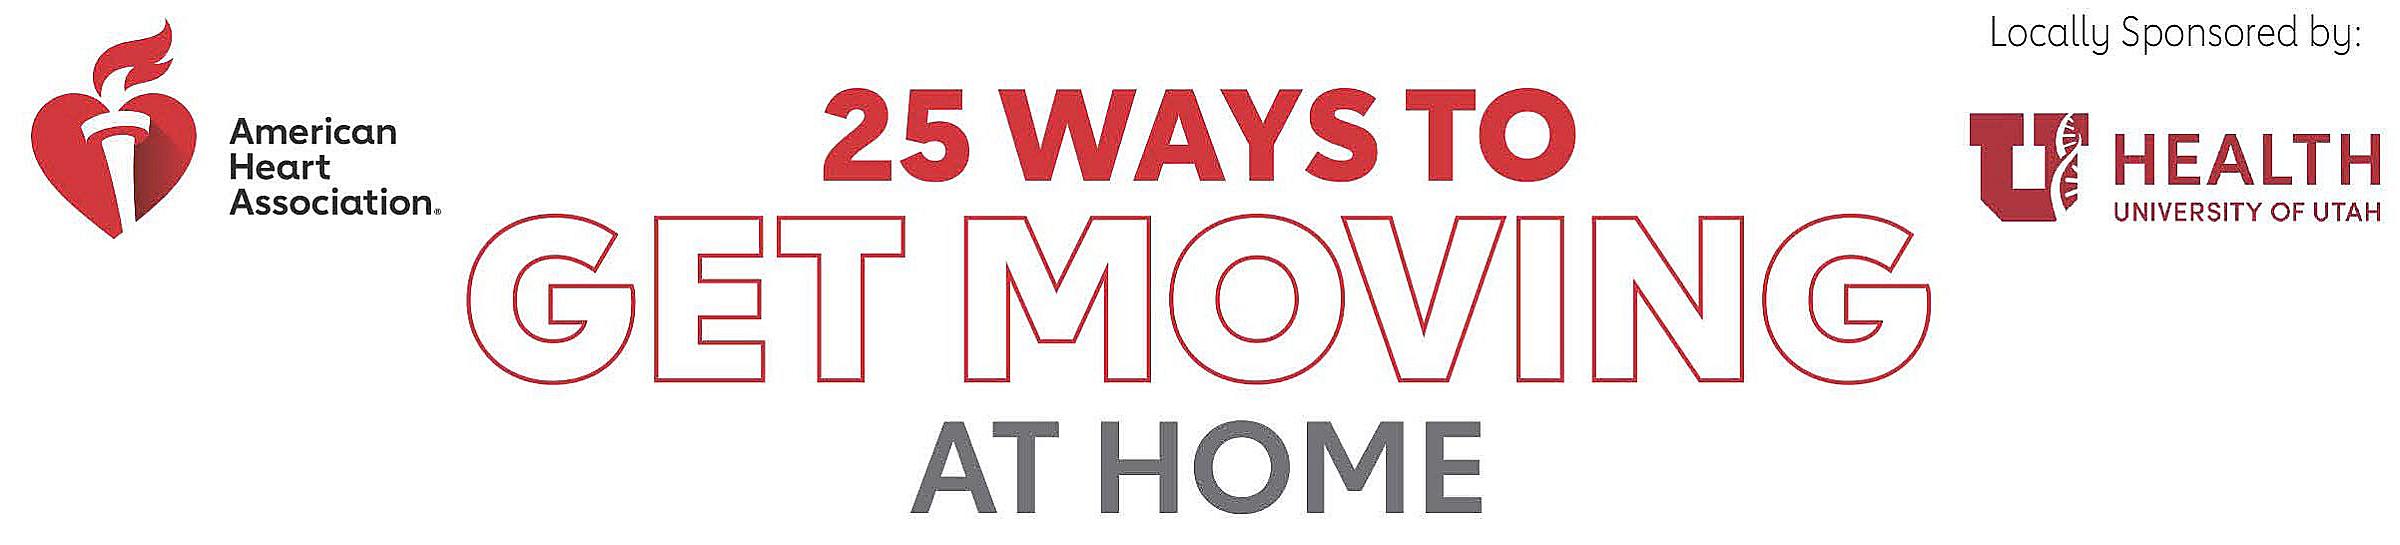 25 ways to get moving banner